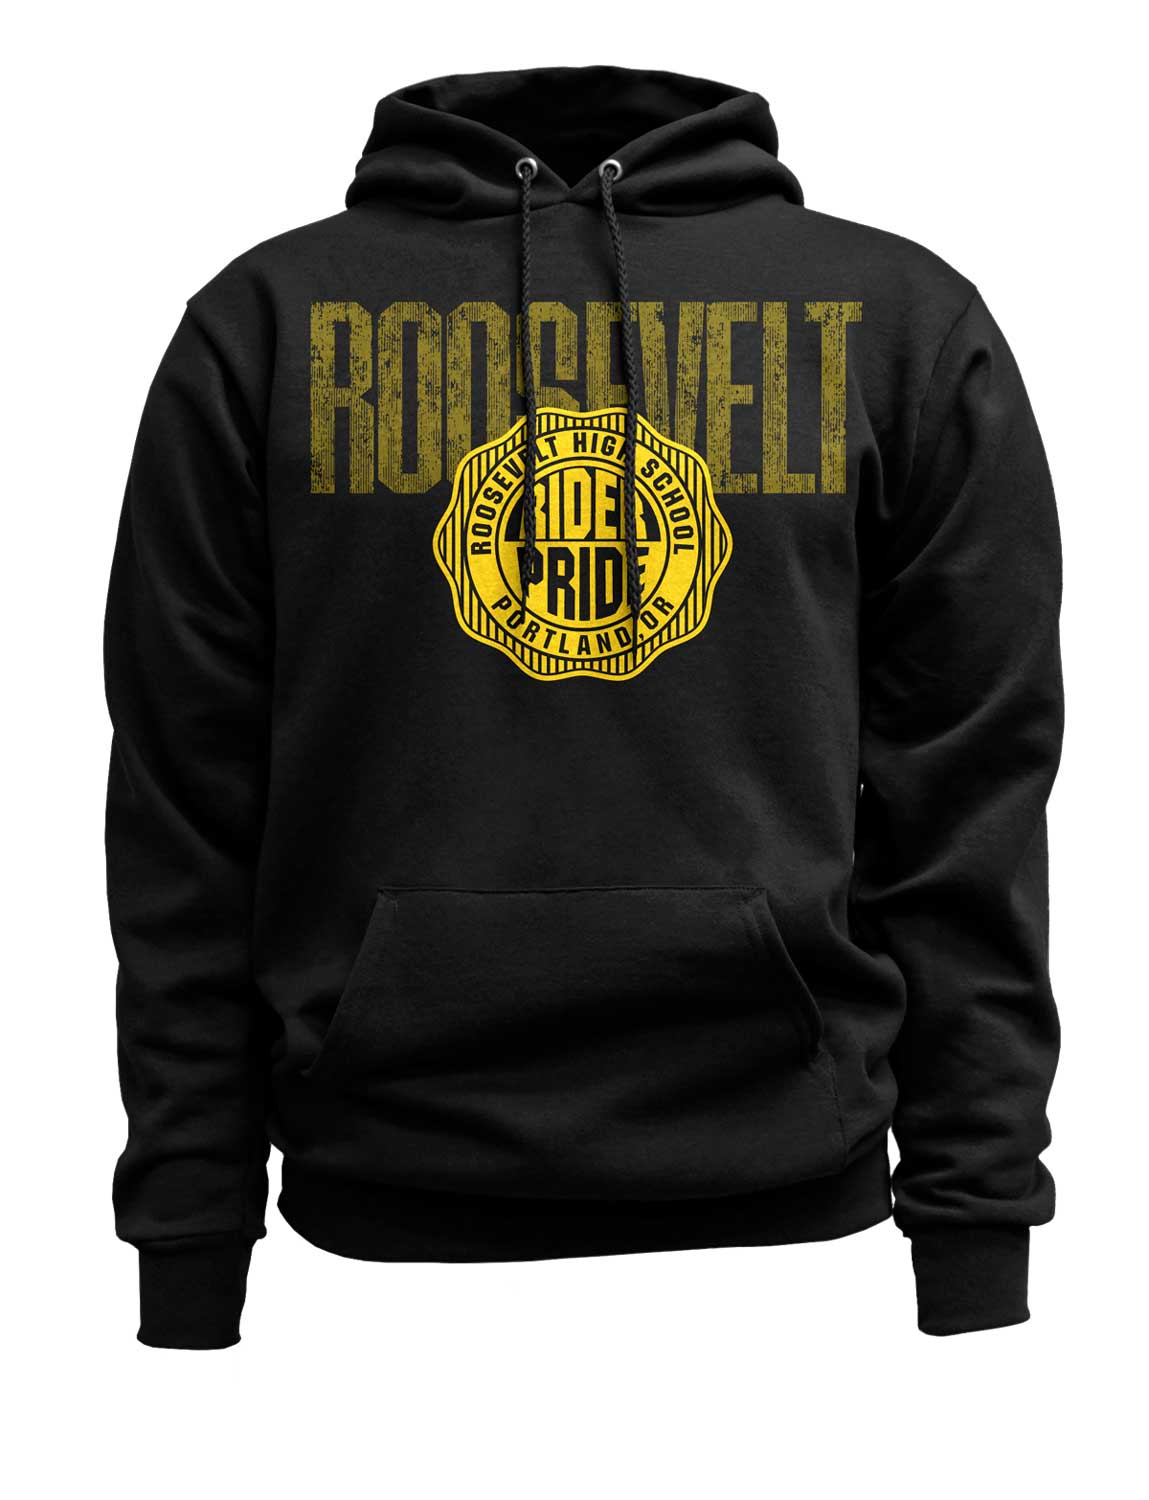 A custom printed hoodie from Righteous - uniforms, gear & swag 